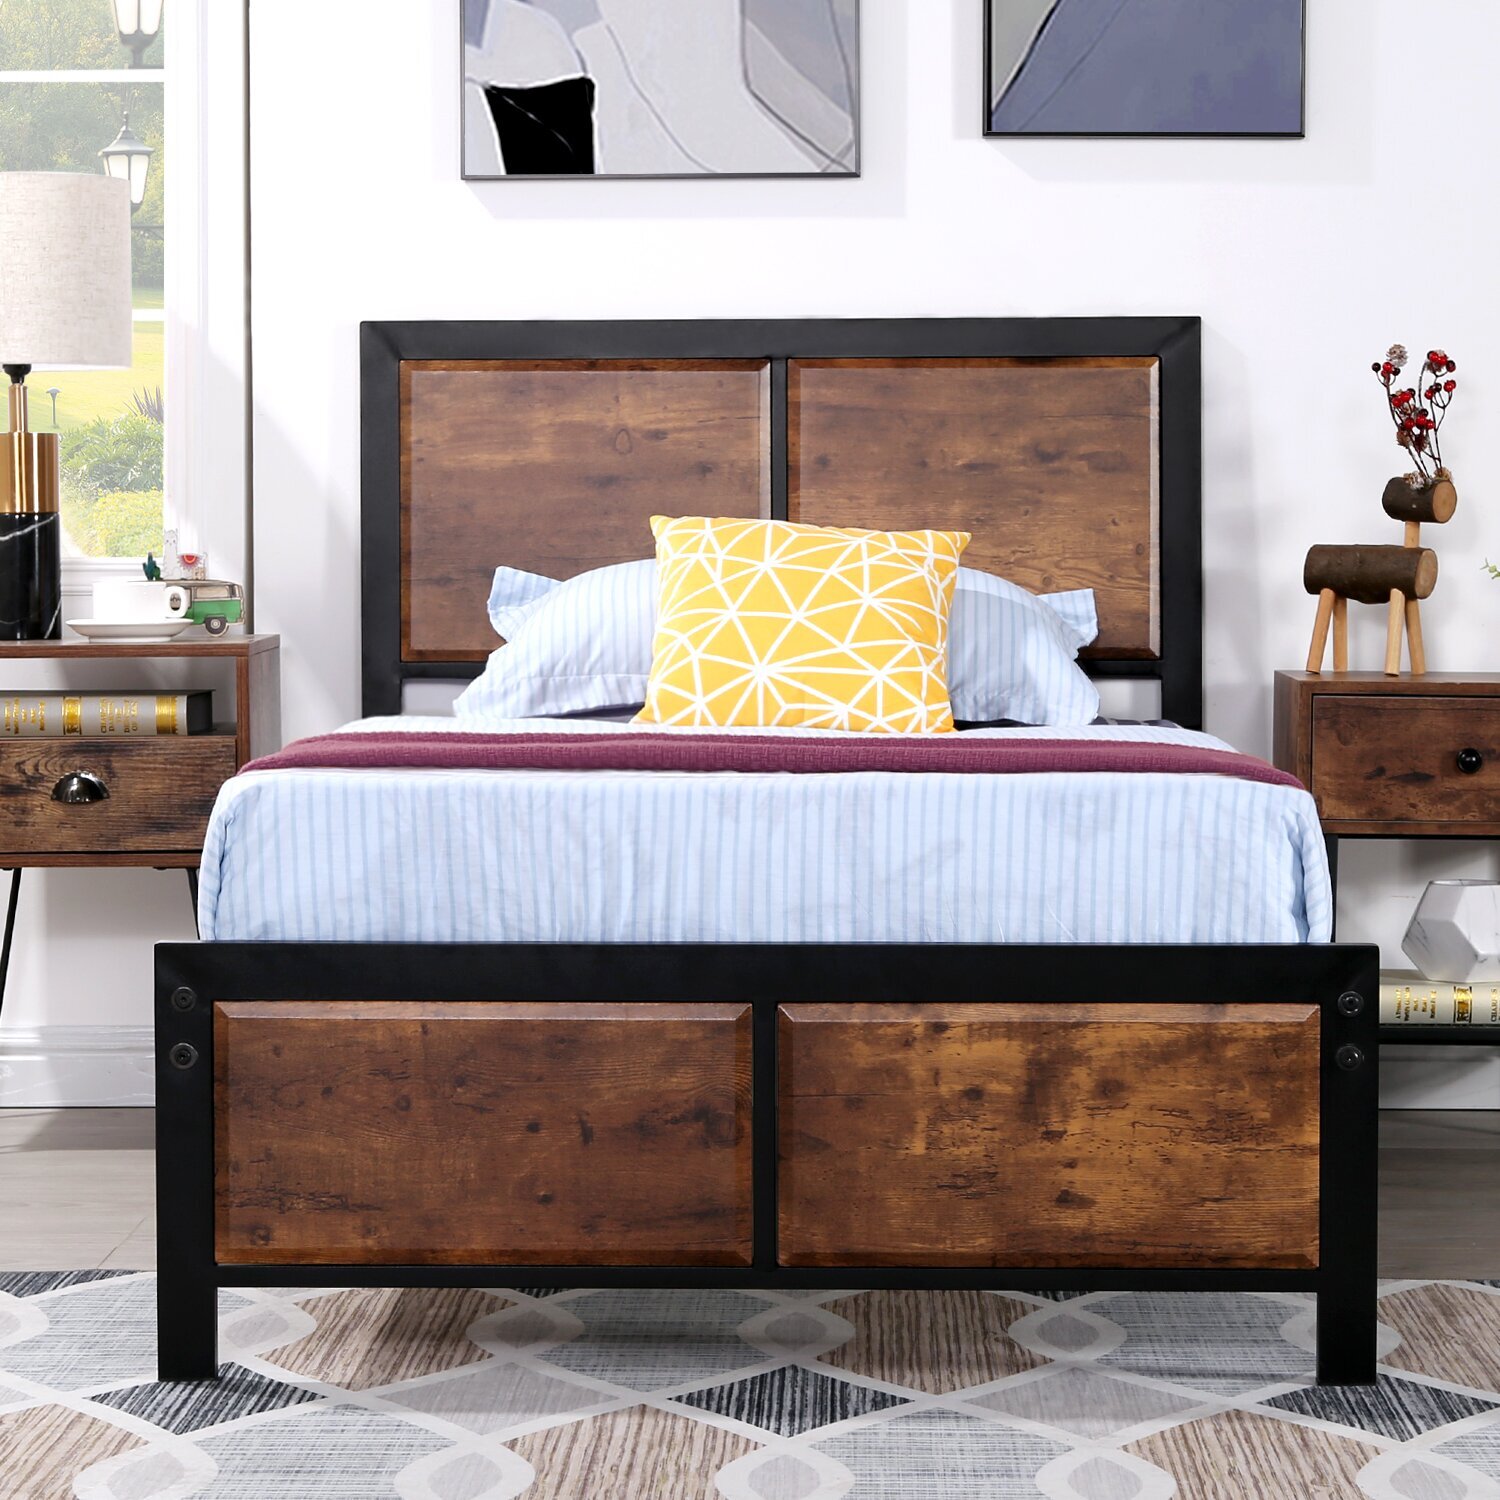 A paneled, minimalist iron and wood bed frame